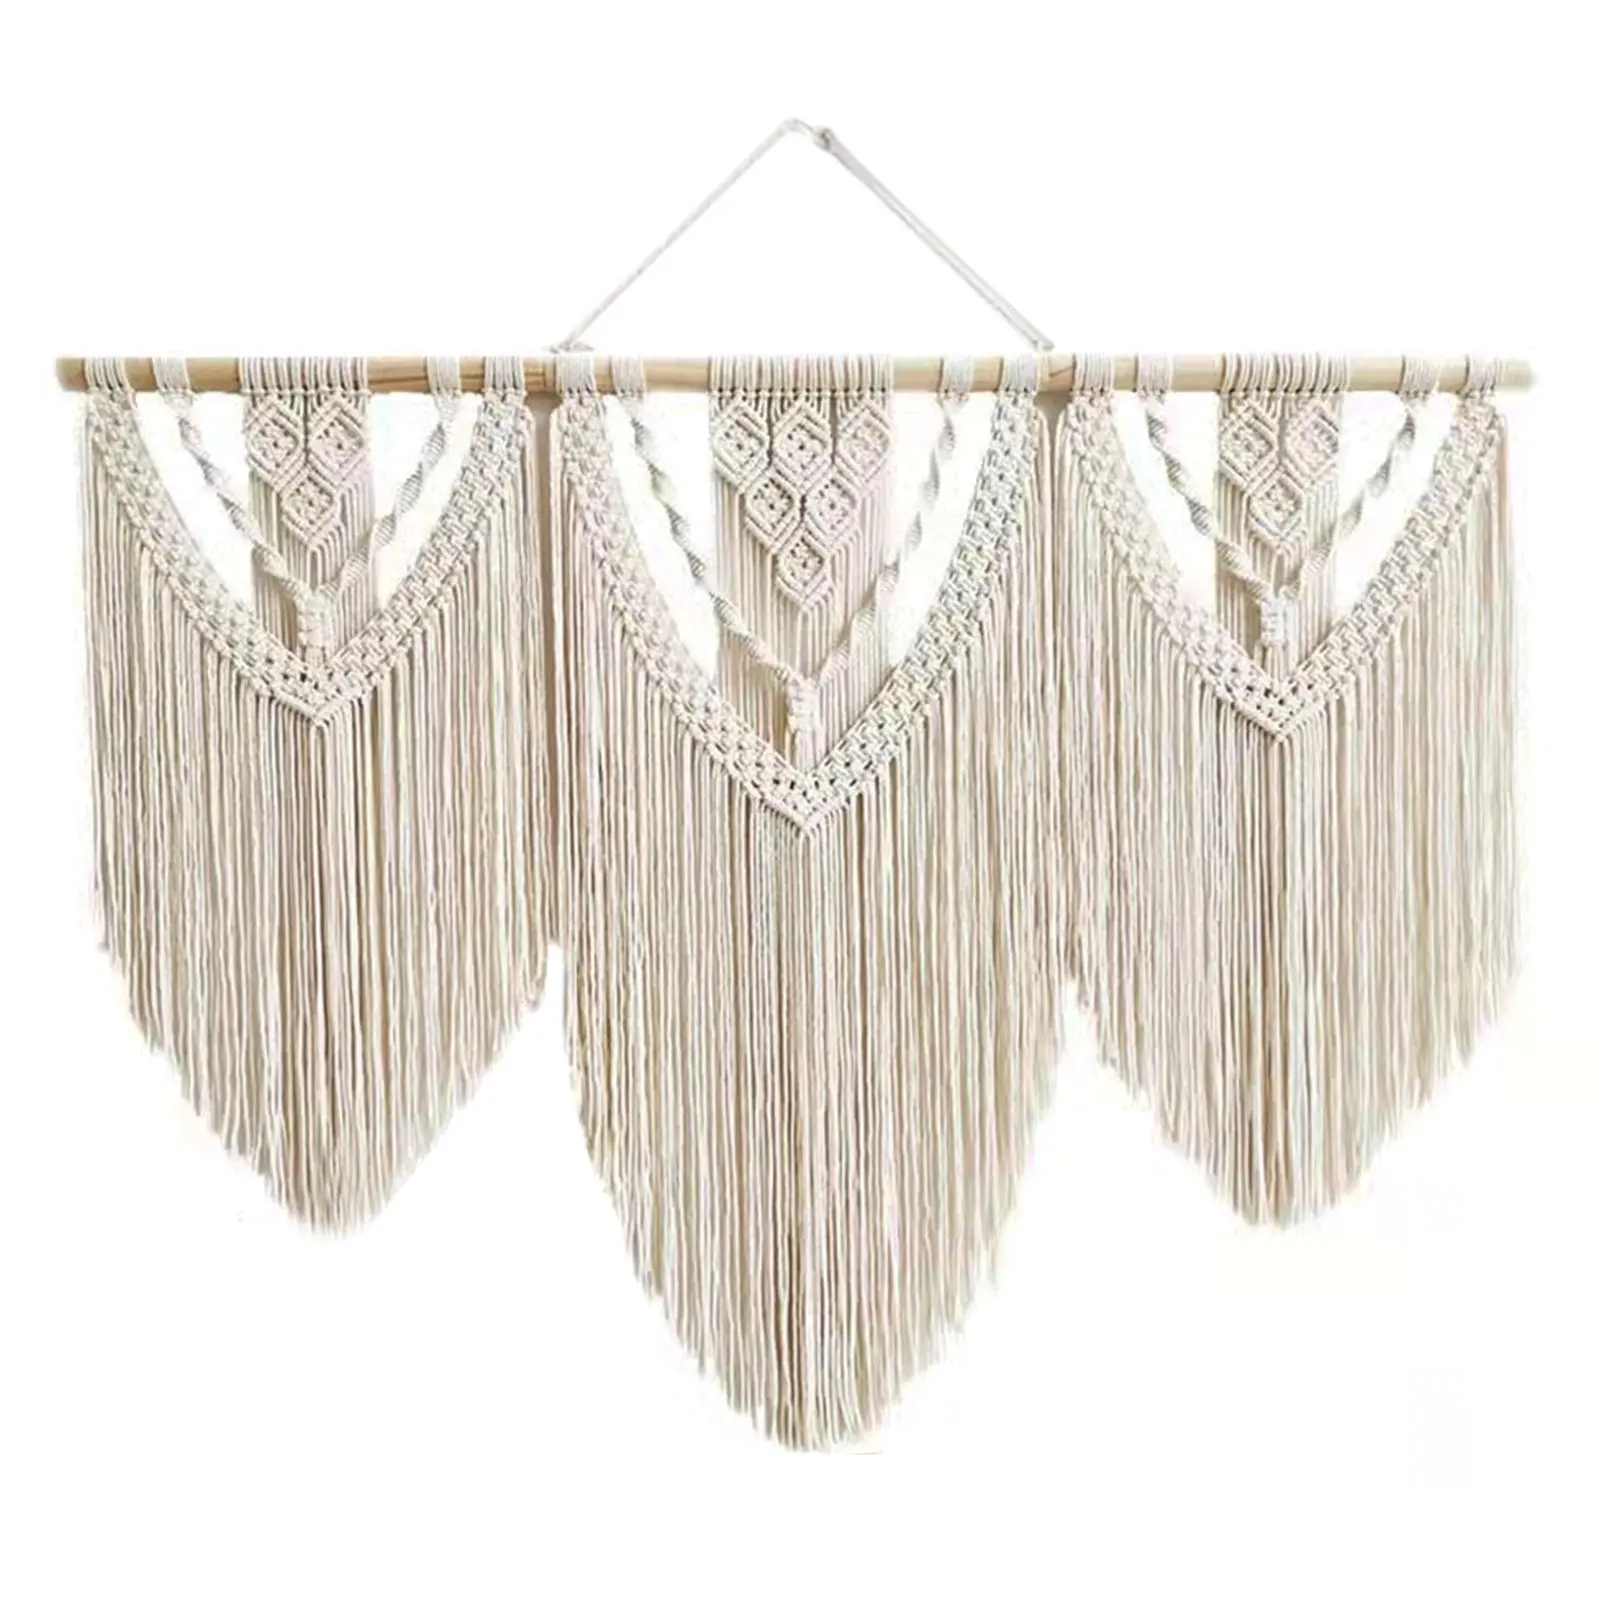 

Living Room Hand Woven Wedding 110 X 82cm Large Curtain Bedroom With Wooden Stick Macrame Tapestry Tassel Wall Hanging